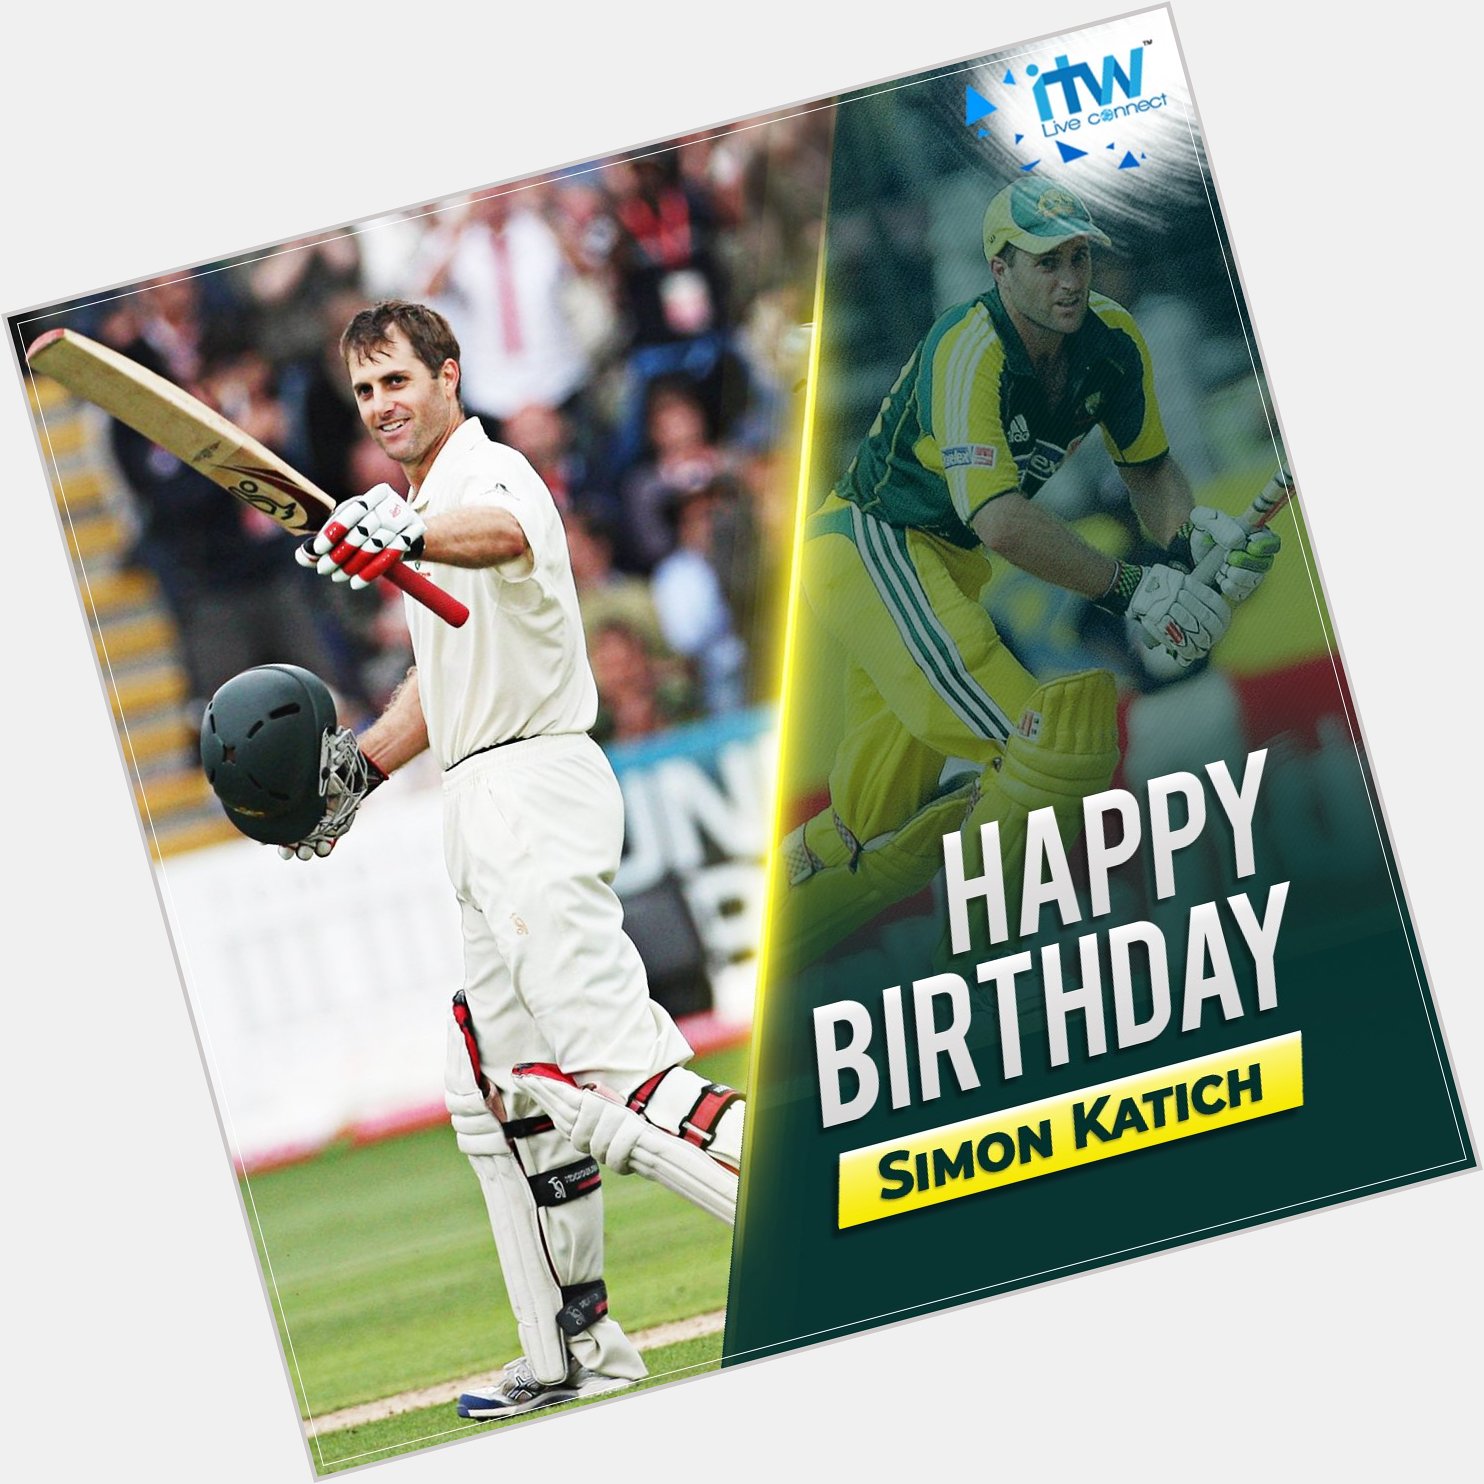 Wishing former left-handed opening batsman Simon Katich a very Happy Birthday, as he turns 43 today. 